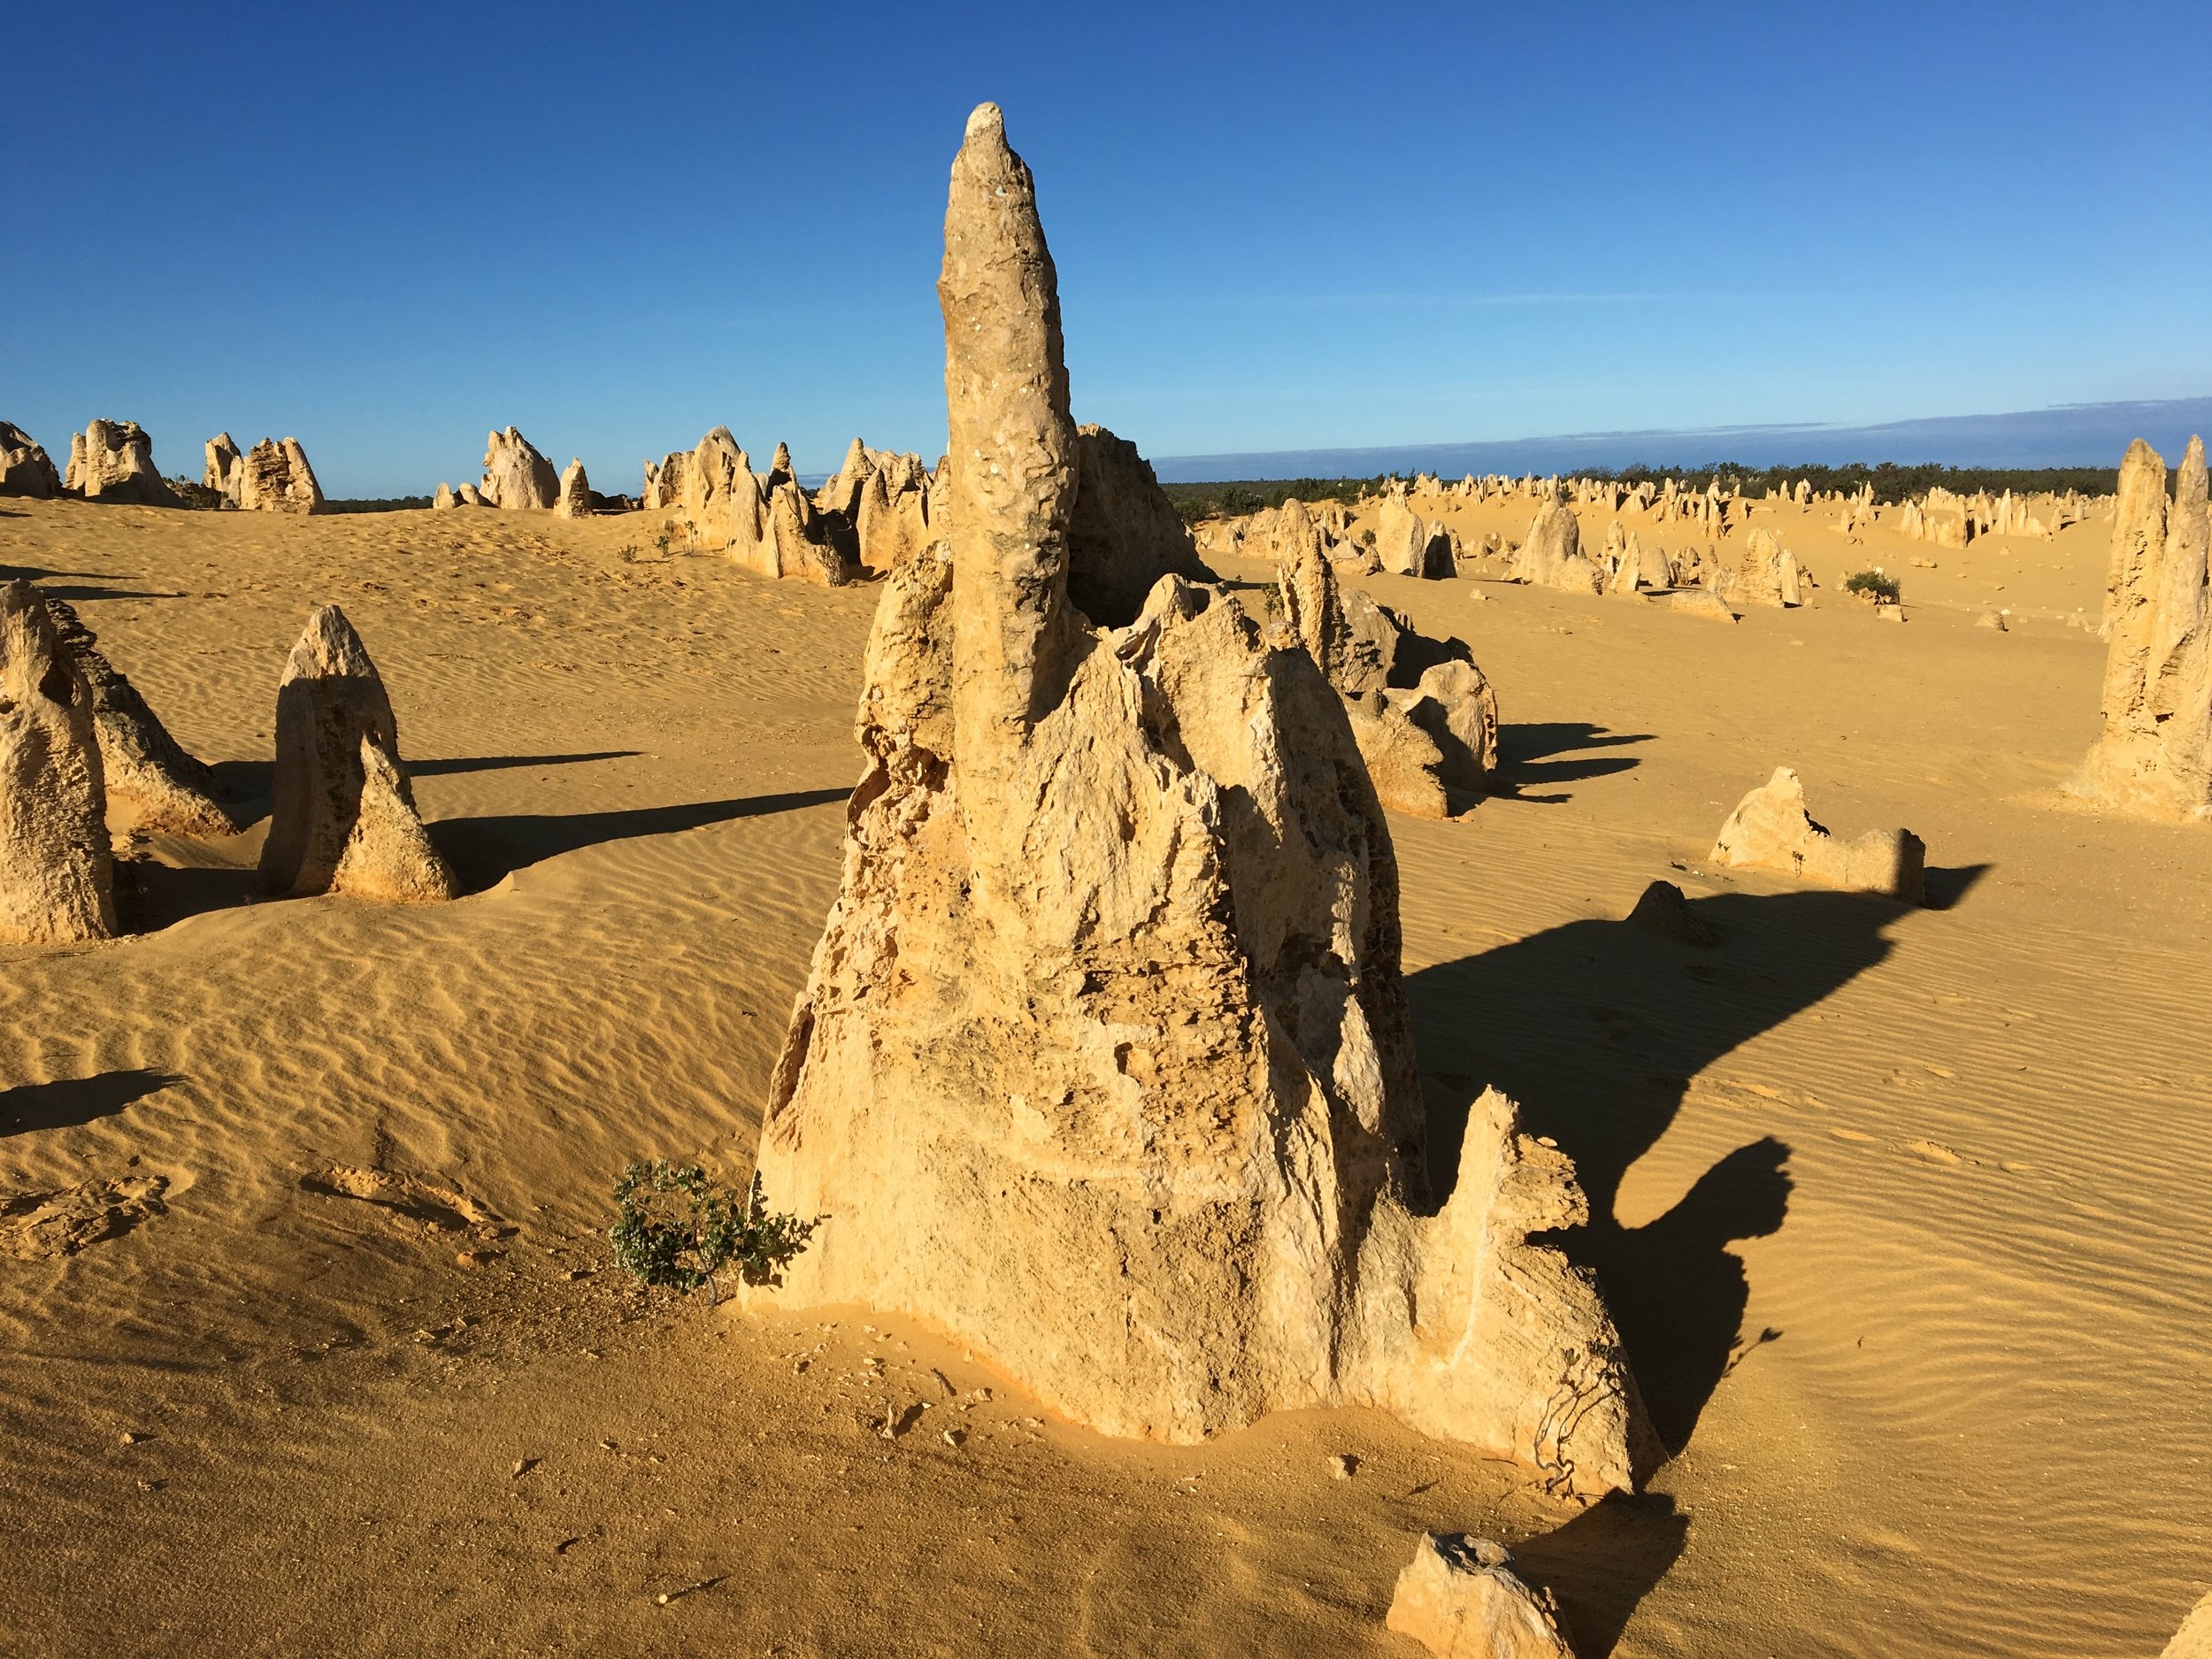 The Pinnacles rock formations